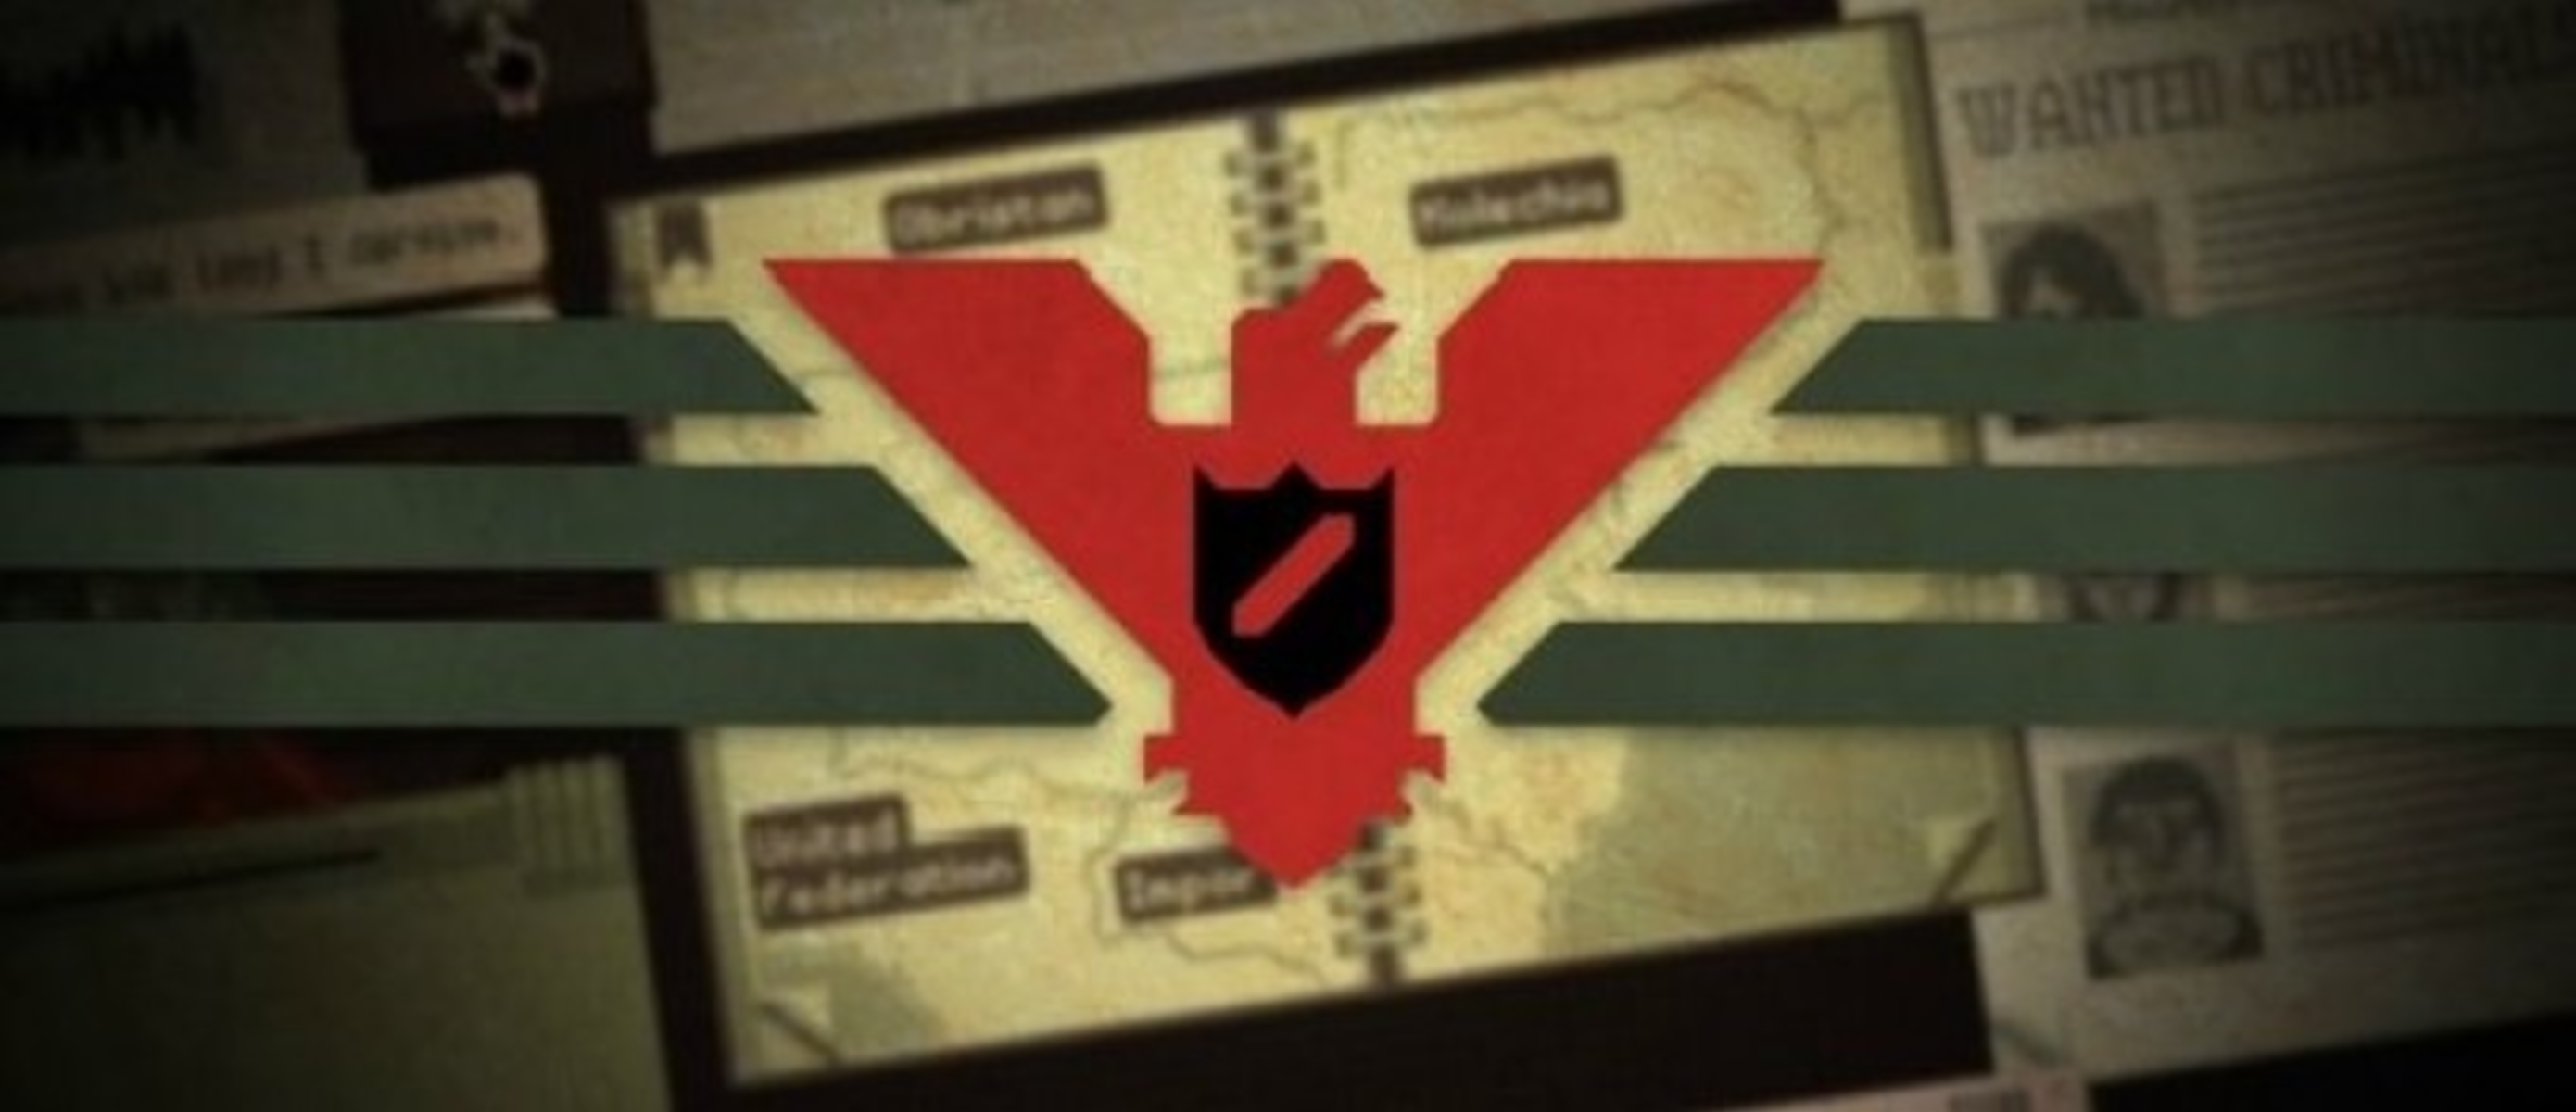 That s not my neighbor papers please. Арстотцка флаг. Слава Арстотцка. Паперс плиз. Papers please игра.